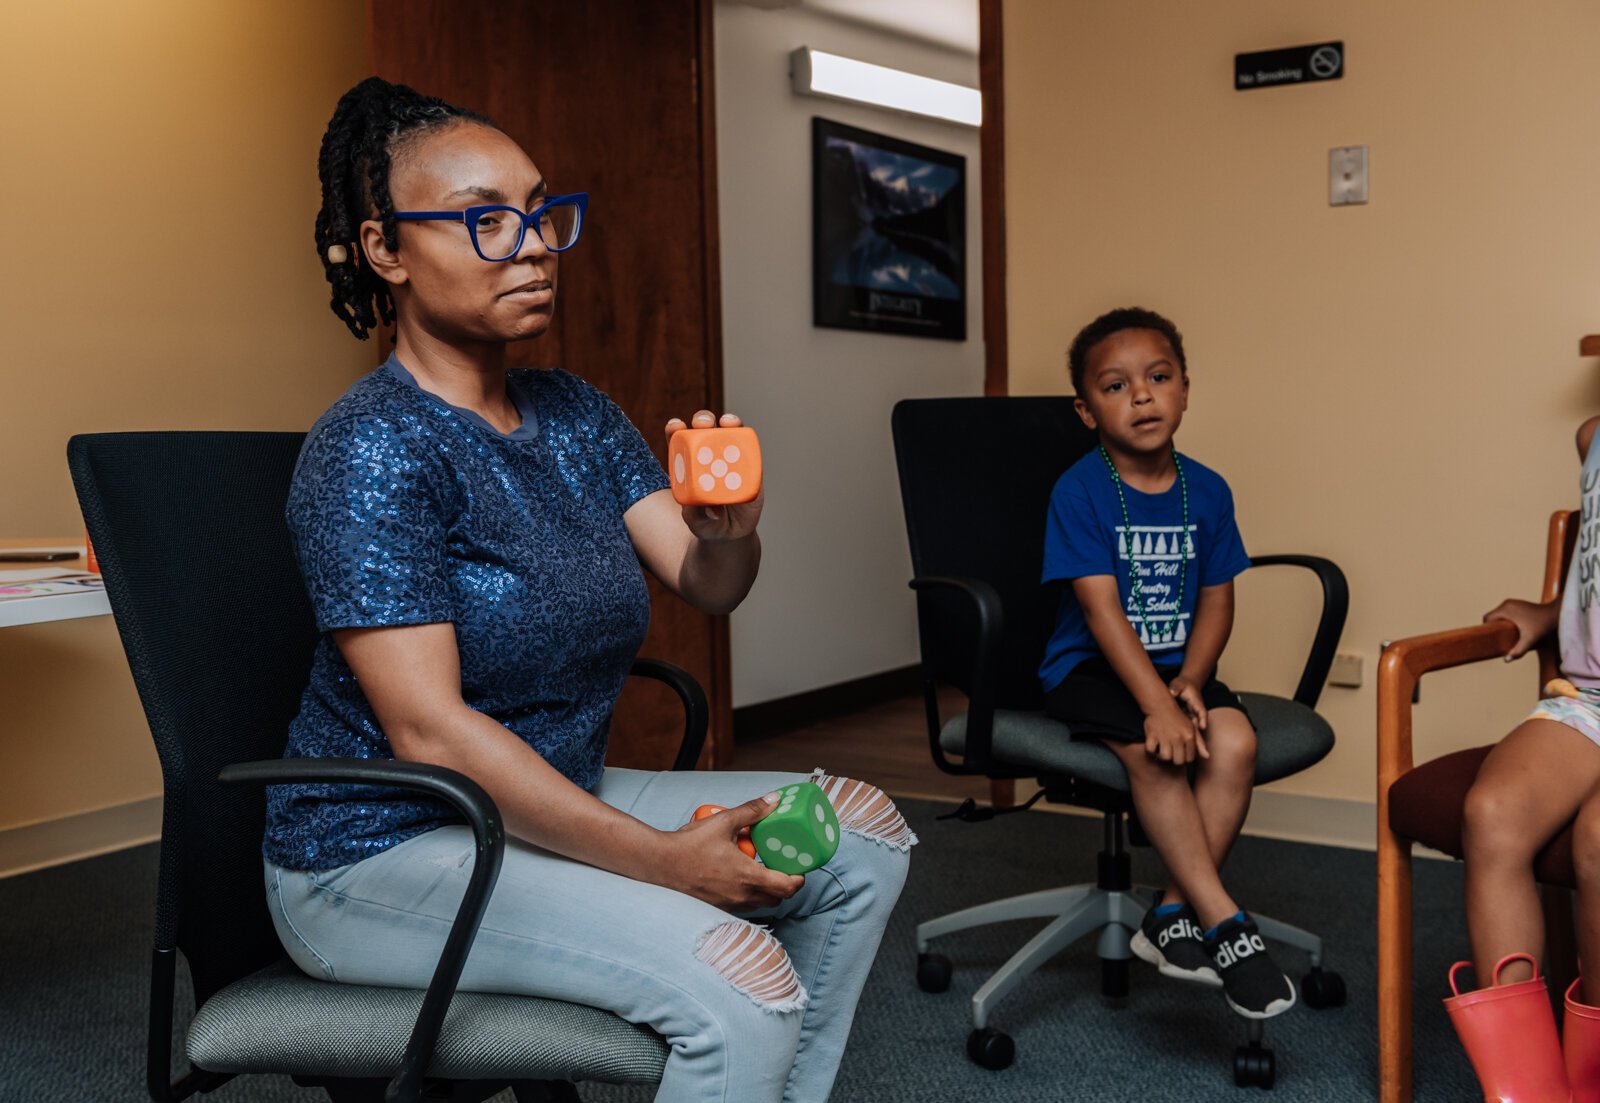 Alle Wims of Brain Geeks Learn educational services leads her students in a competitive counting game during a private tutoring session at PENTA Center, 2513 S. Calhoun St.